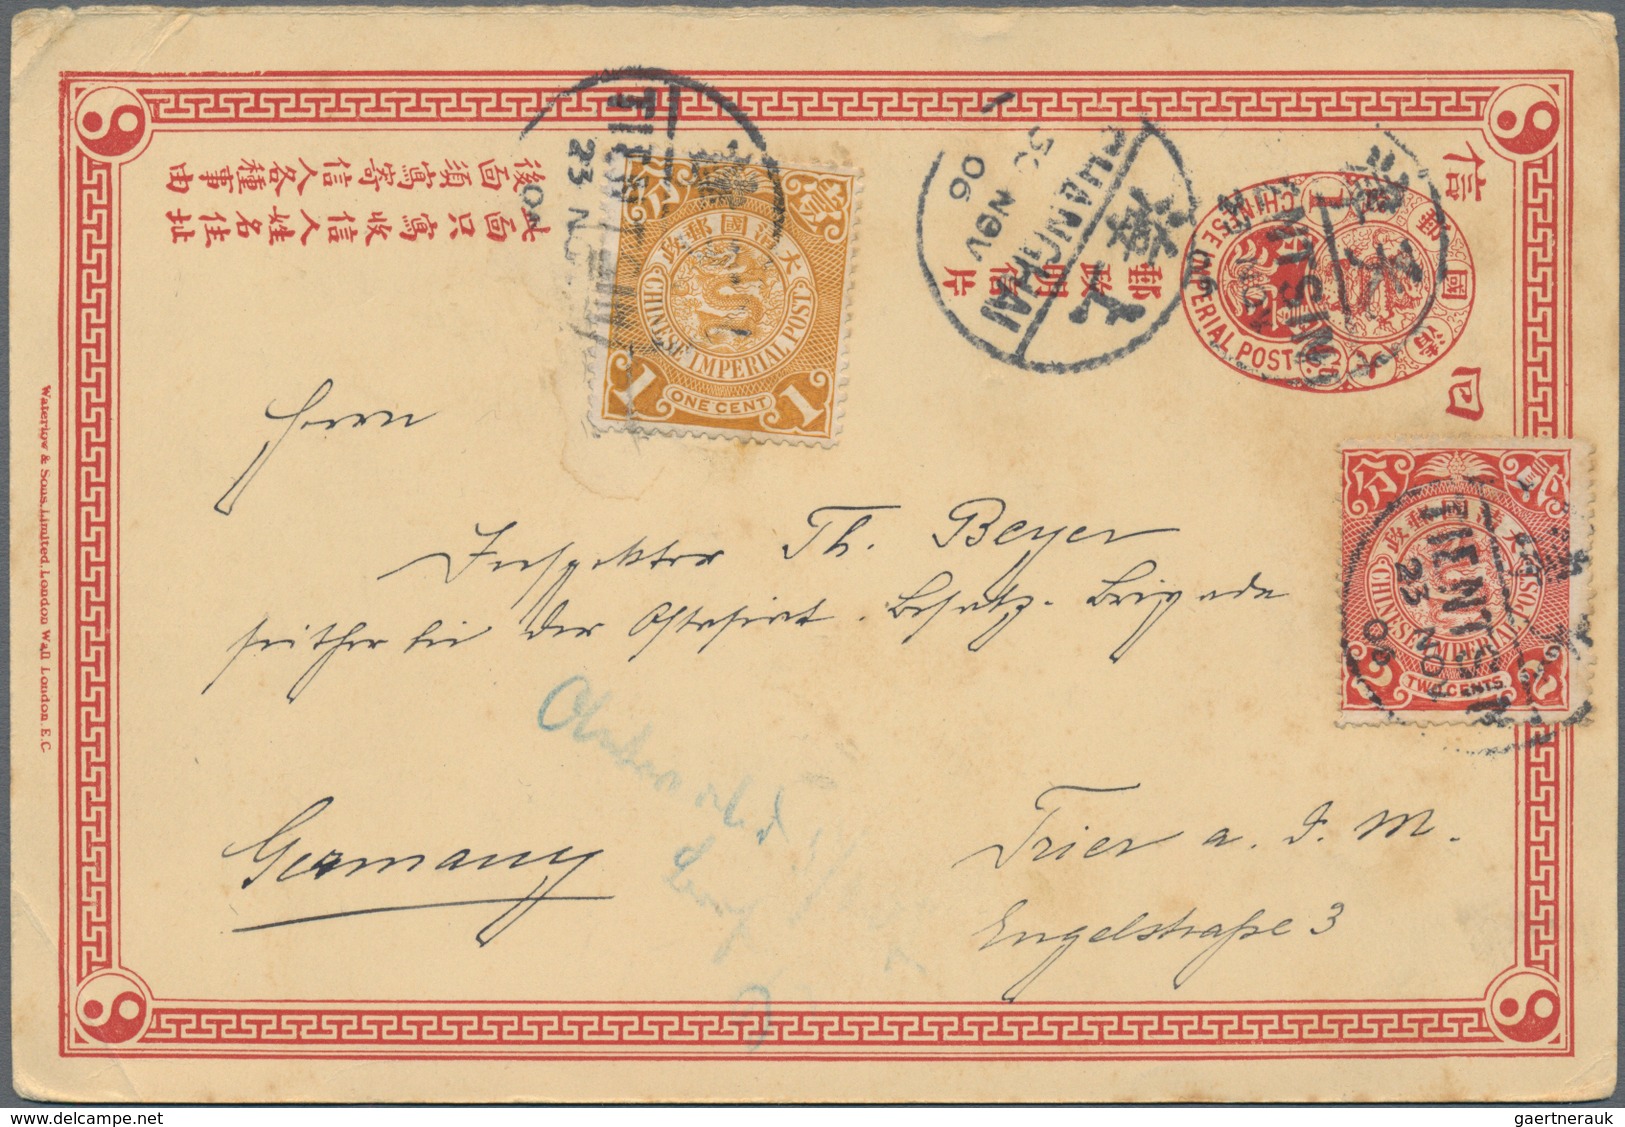 China - Ganzsachen: 1898, Card CIP Question Part 1 C. Uprated Coiling Dragon 1 C. (small Tear), 2 C. - Cartes Postales